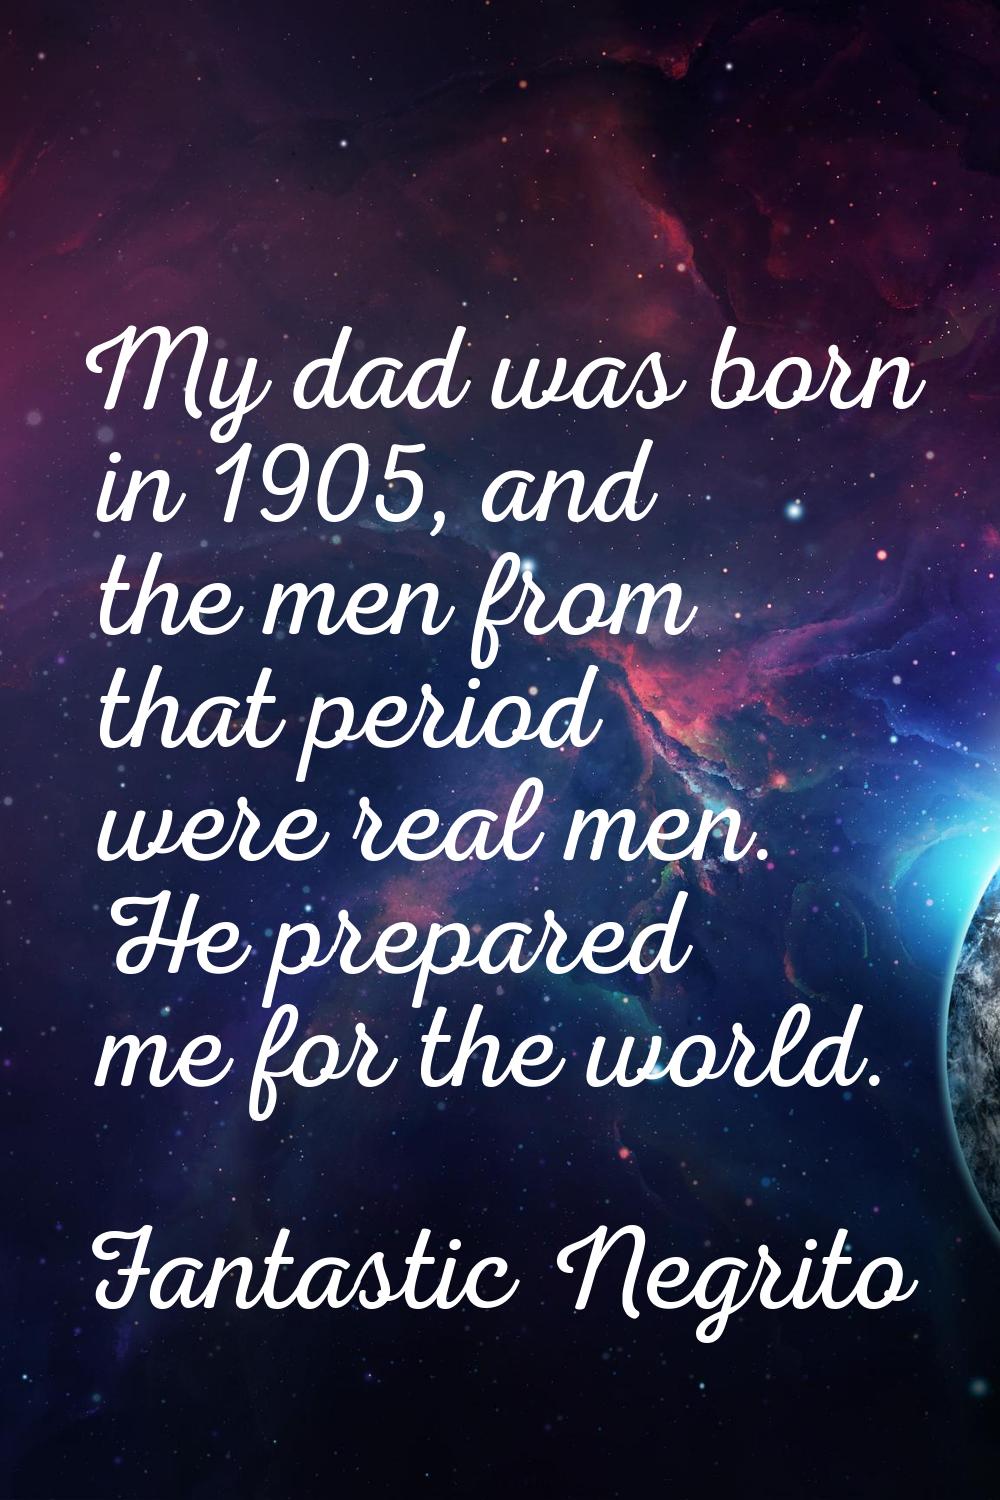 My dad was born in 1905, and the men from that period were real men. He prepared me for the world.